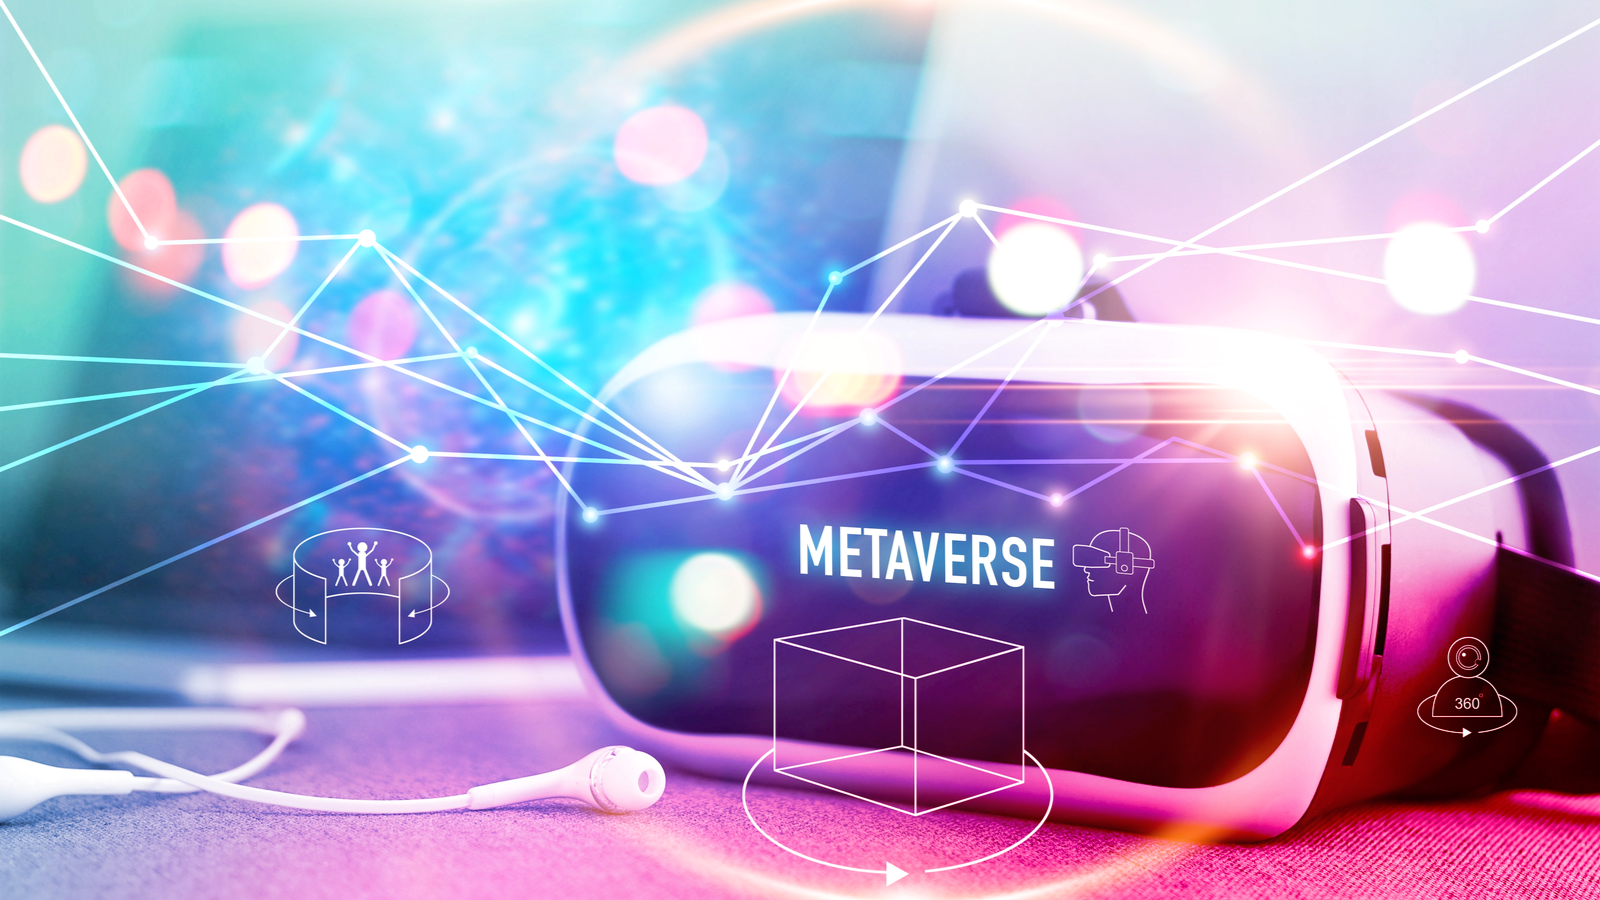 An image of a VR headset and headphones; the word metaverse on the headset